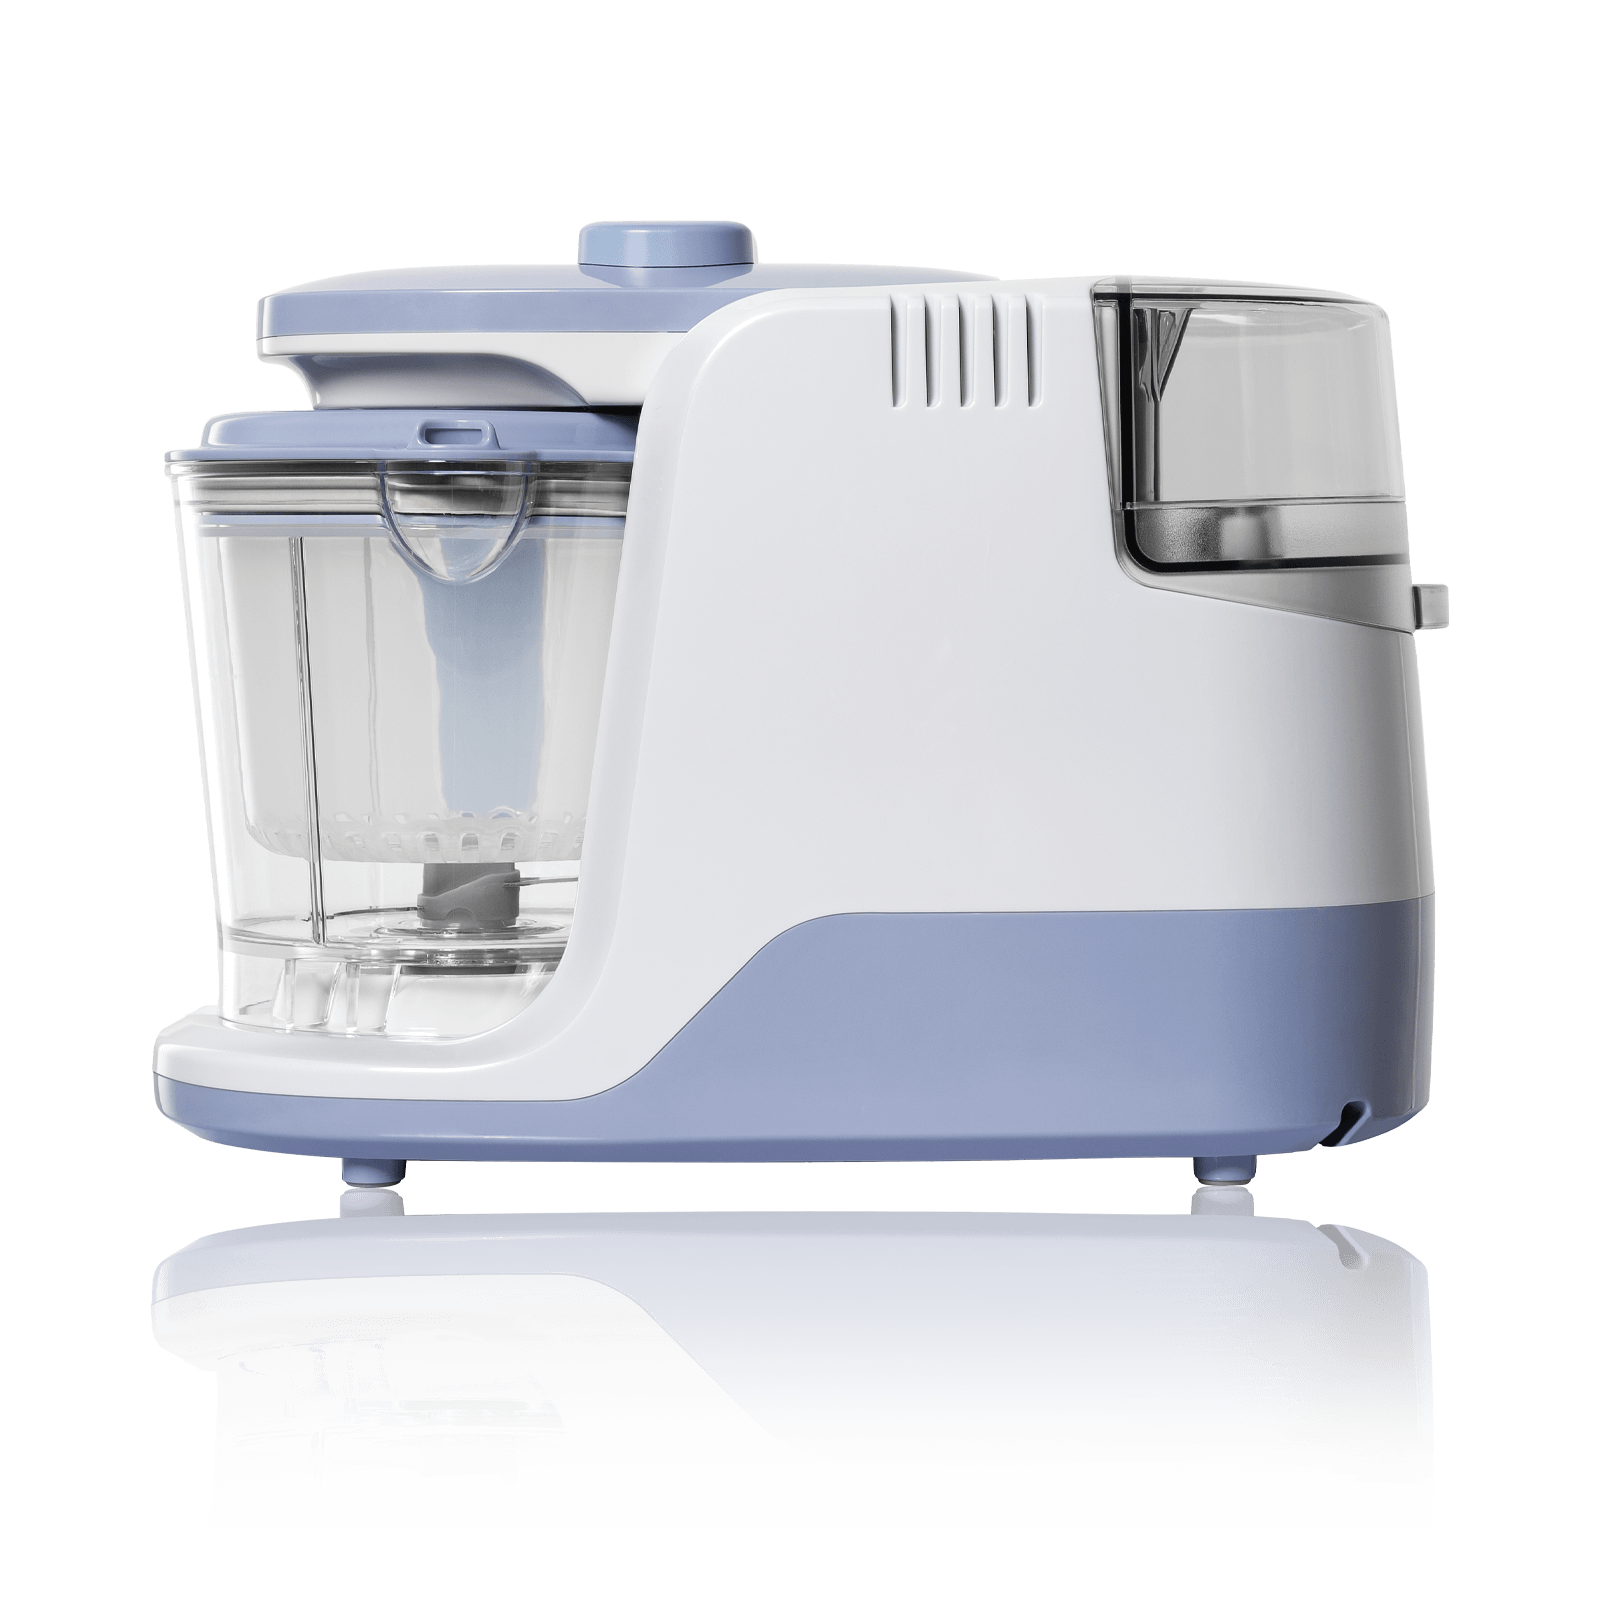 All-In-One Baby Food Maker  BabyGrow Elite - Ventray – Ventray USA